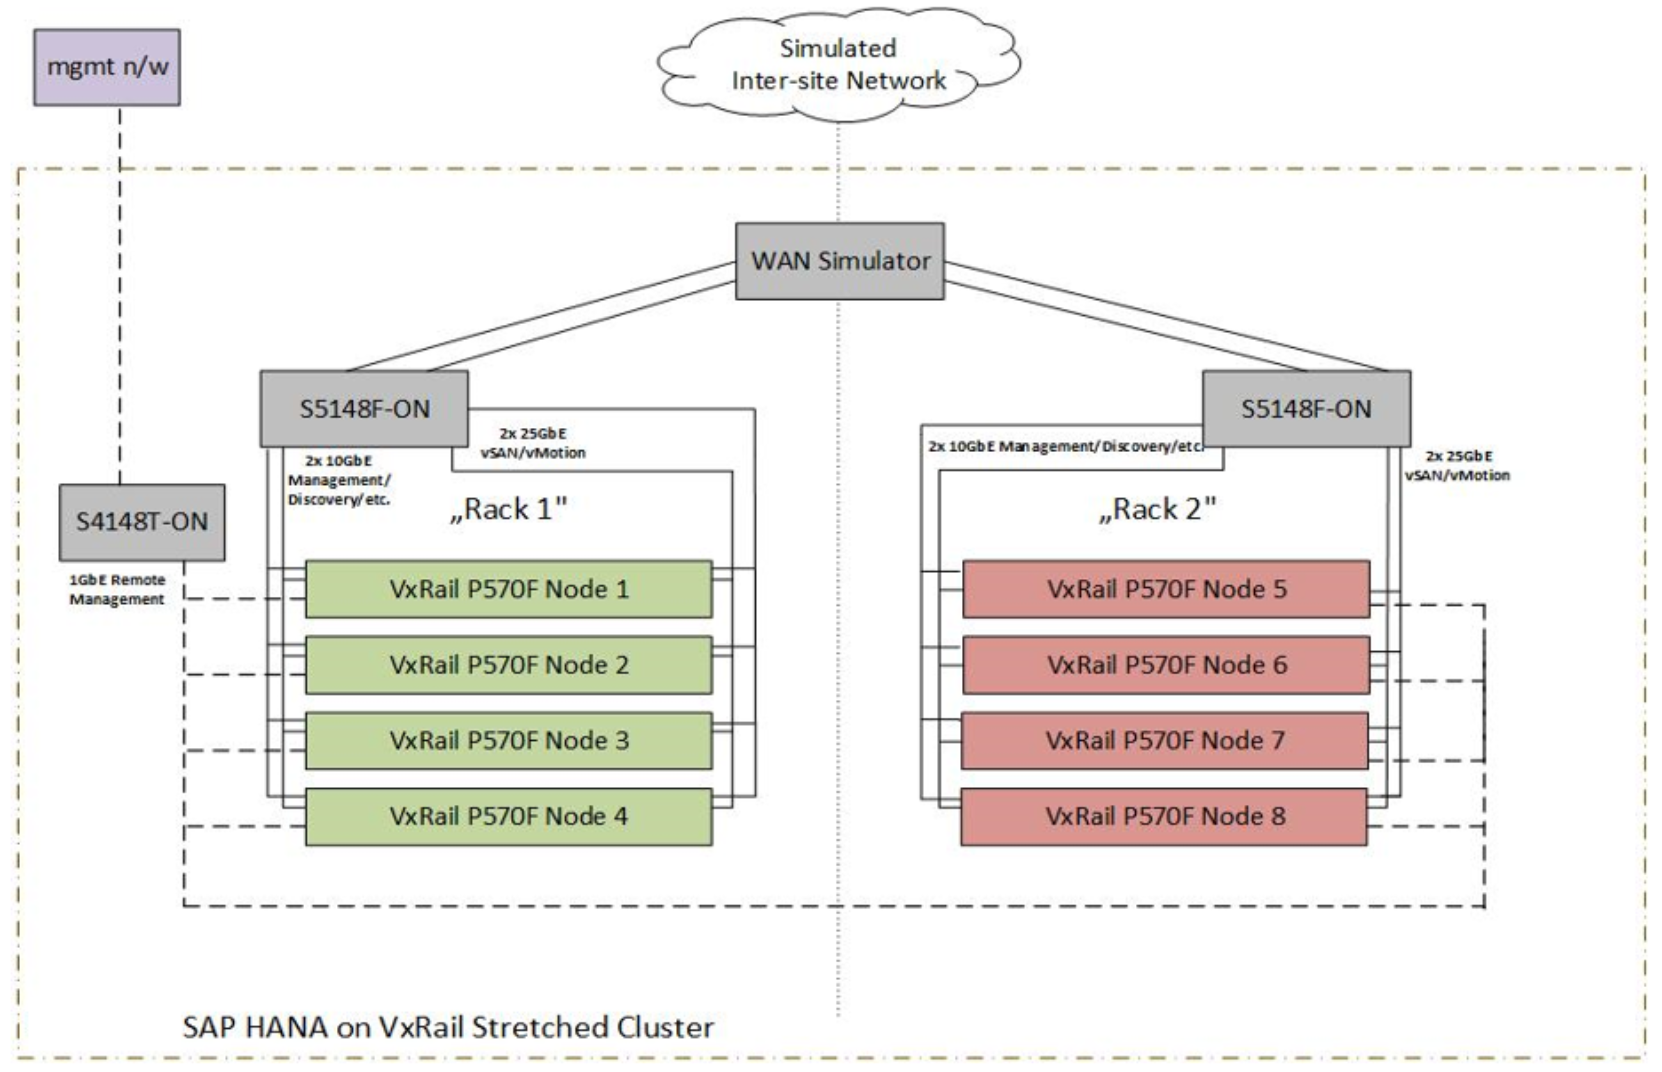 A diagram showing a vSAN stretched cluster deployment